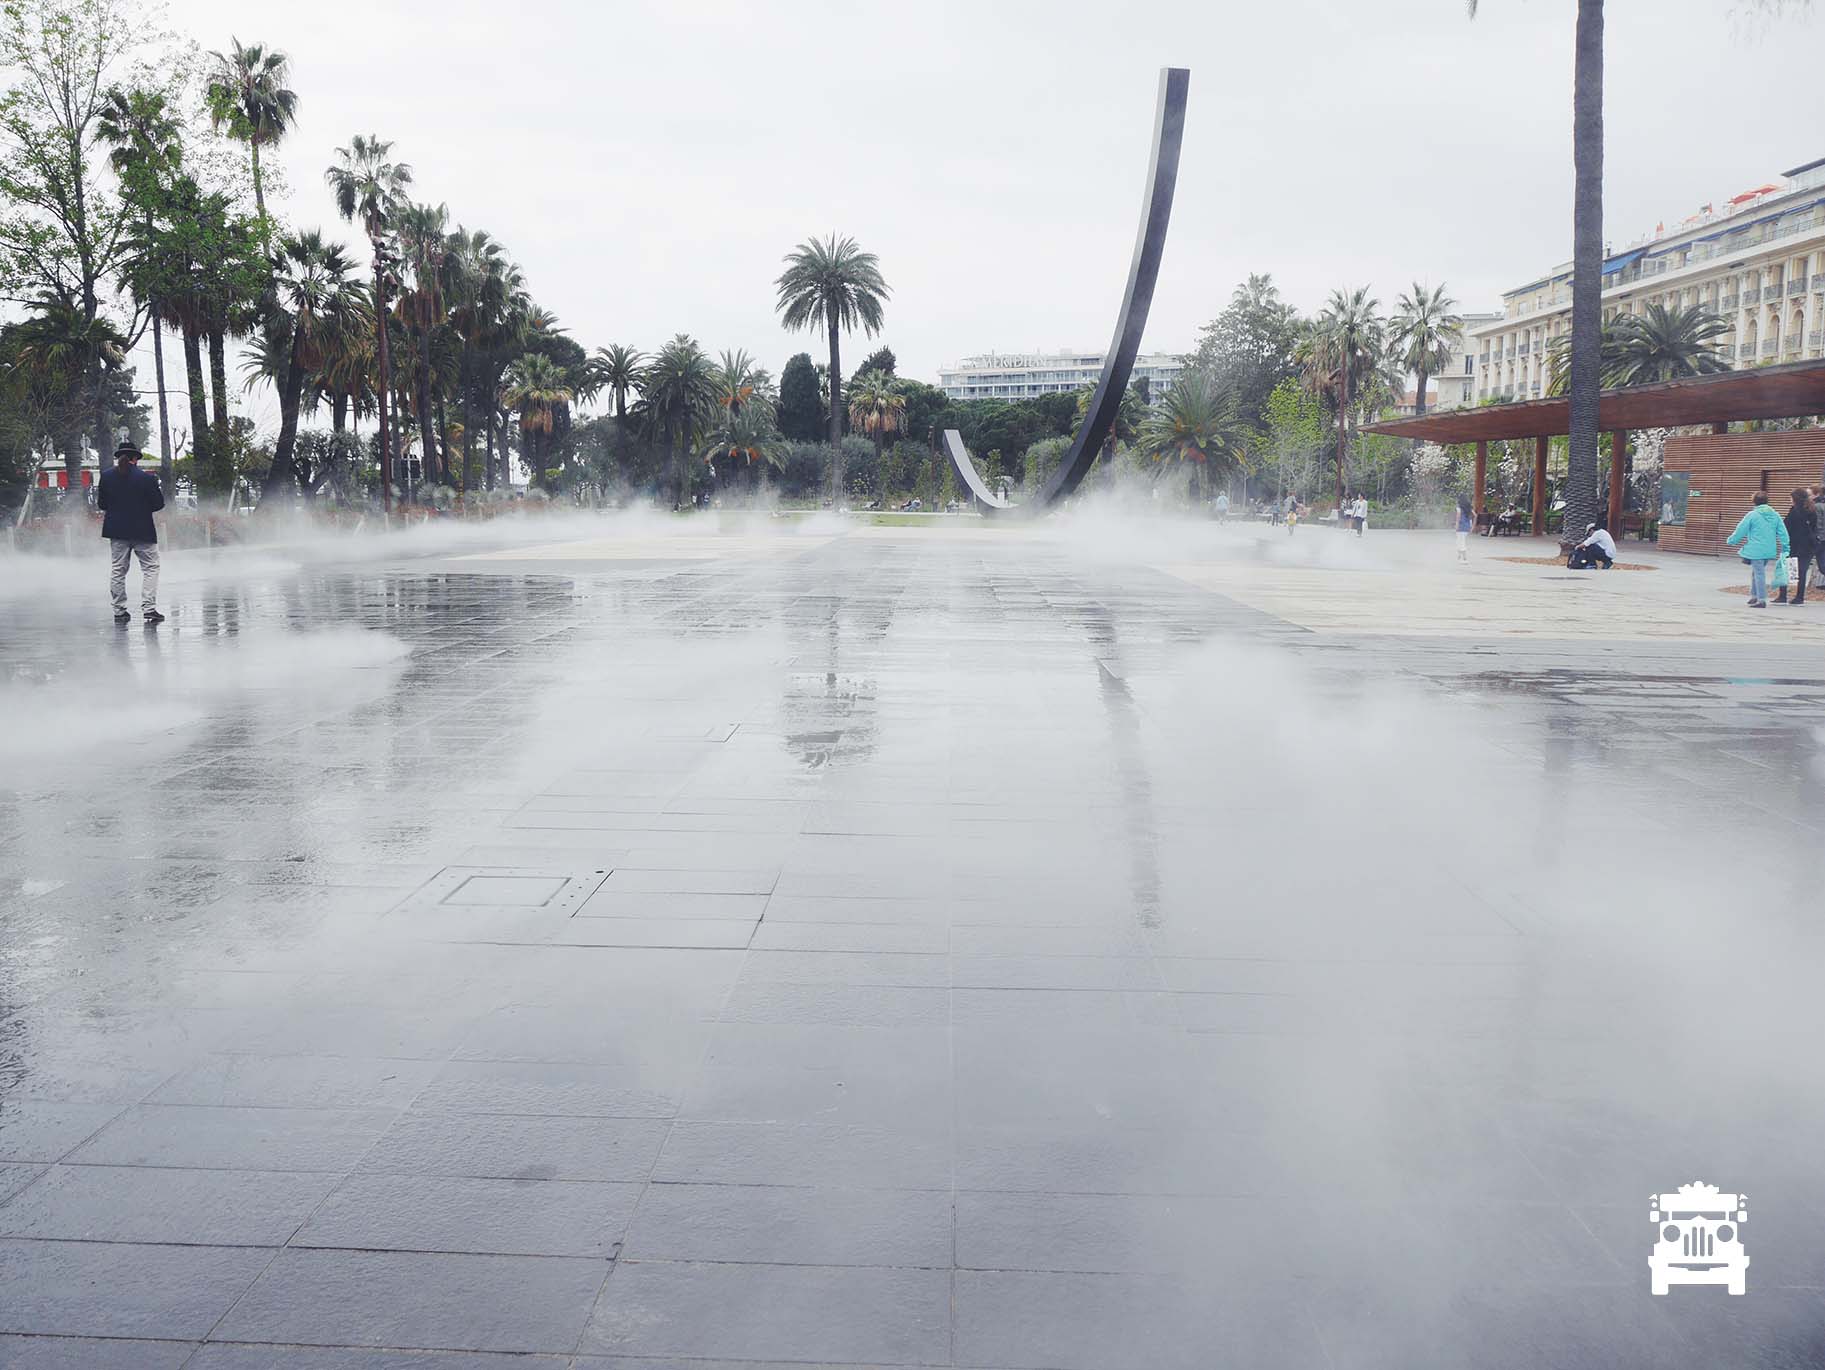 Misty square - misty water sprayed continuously 